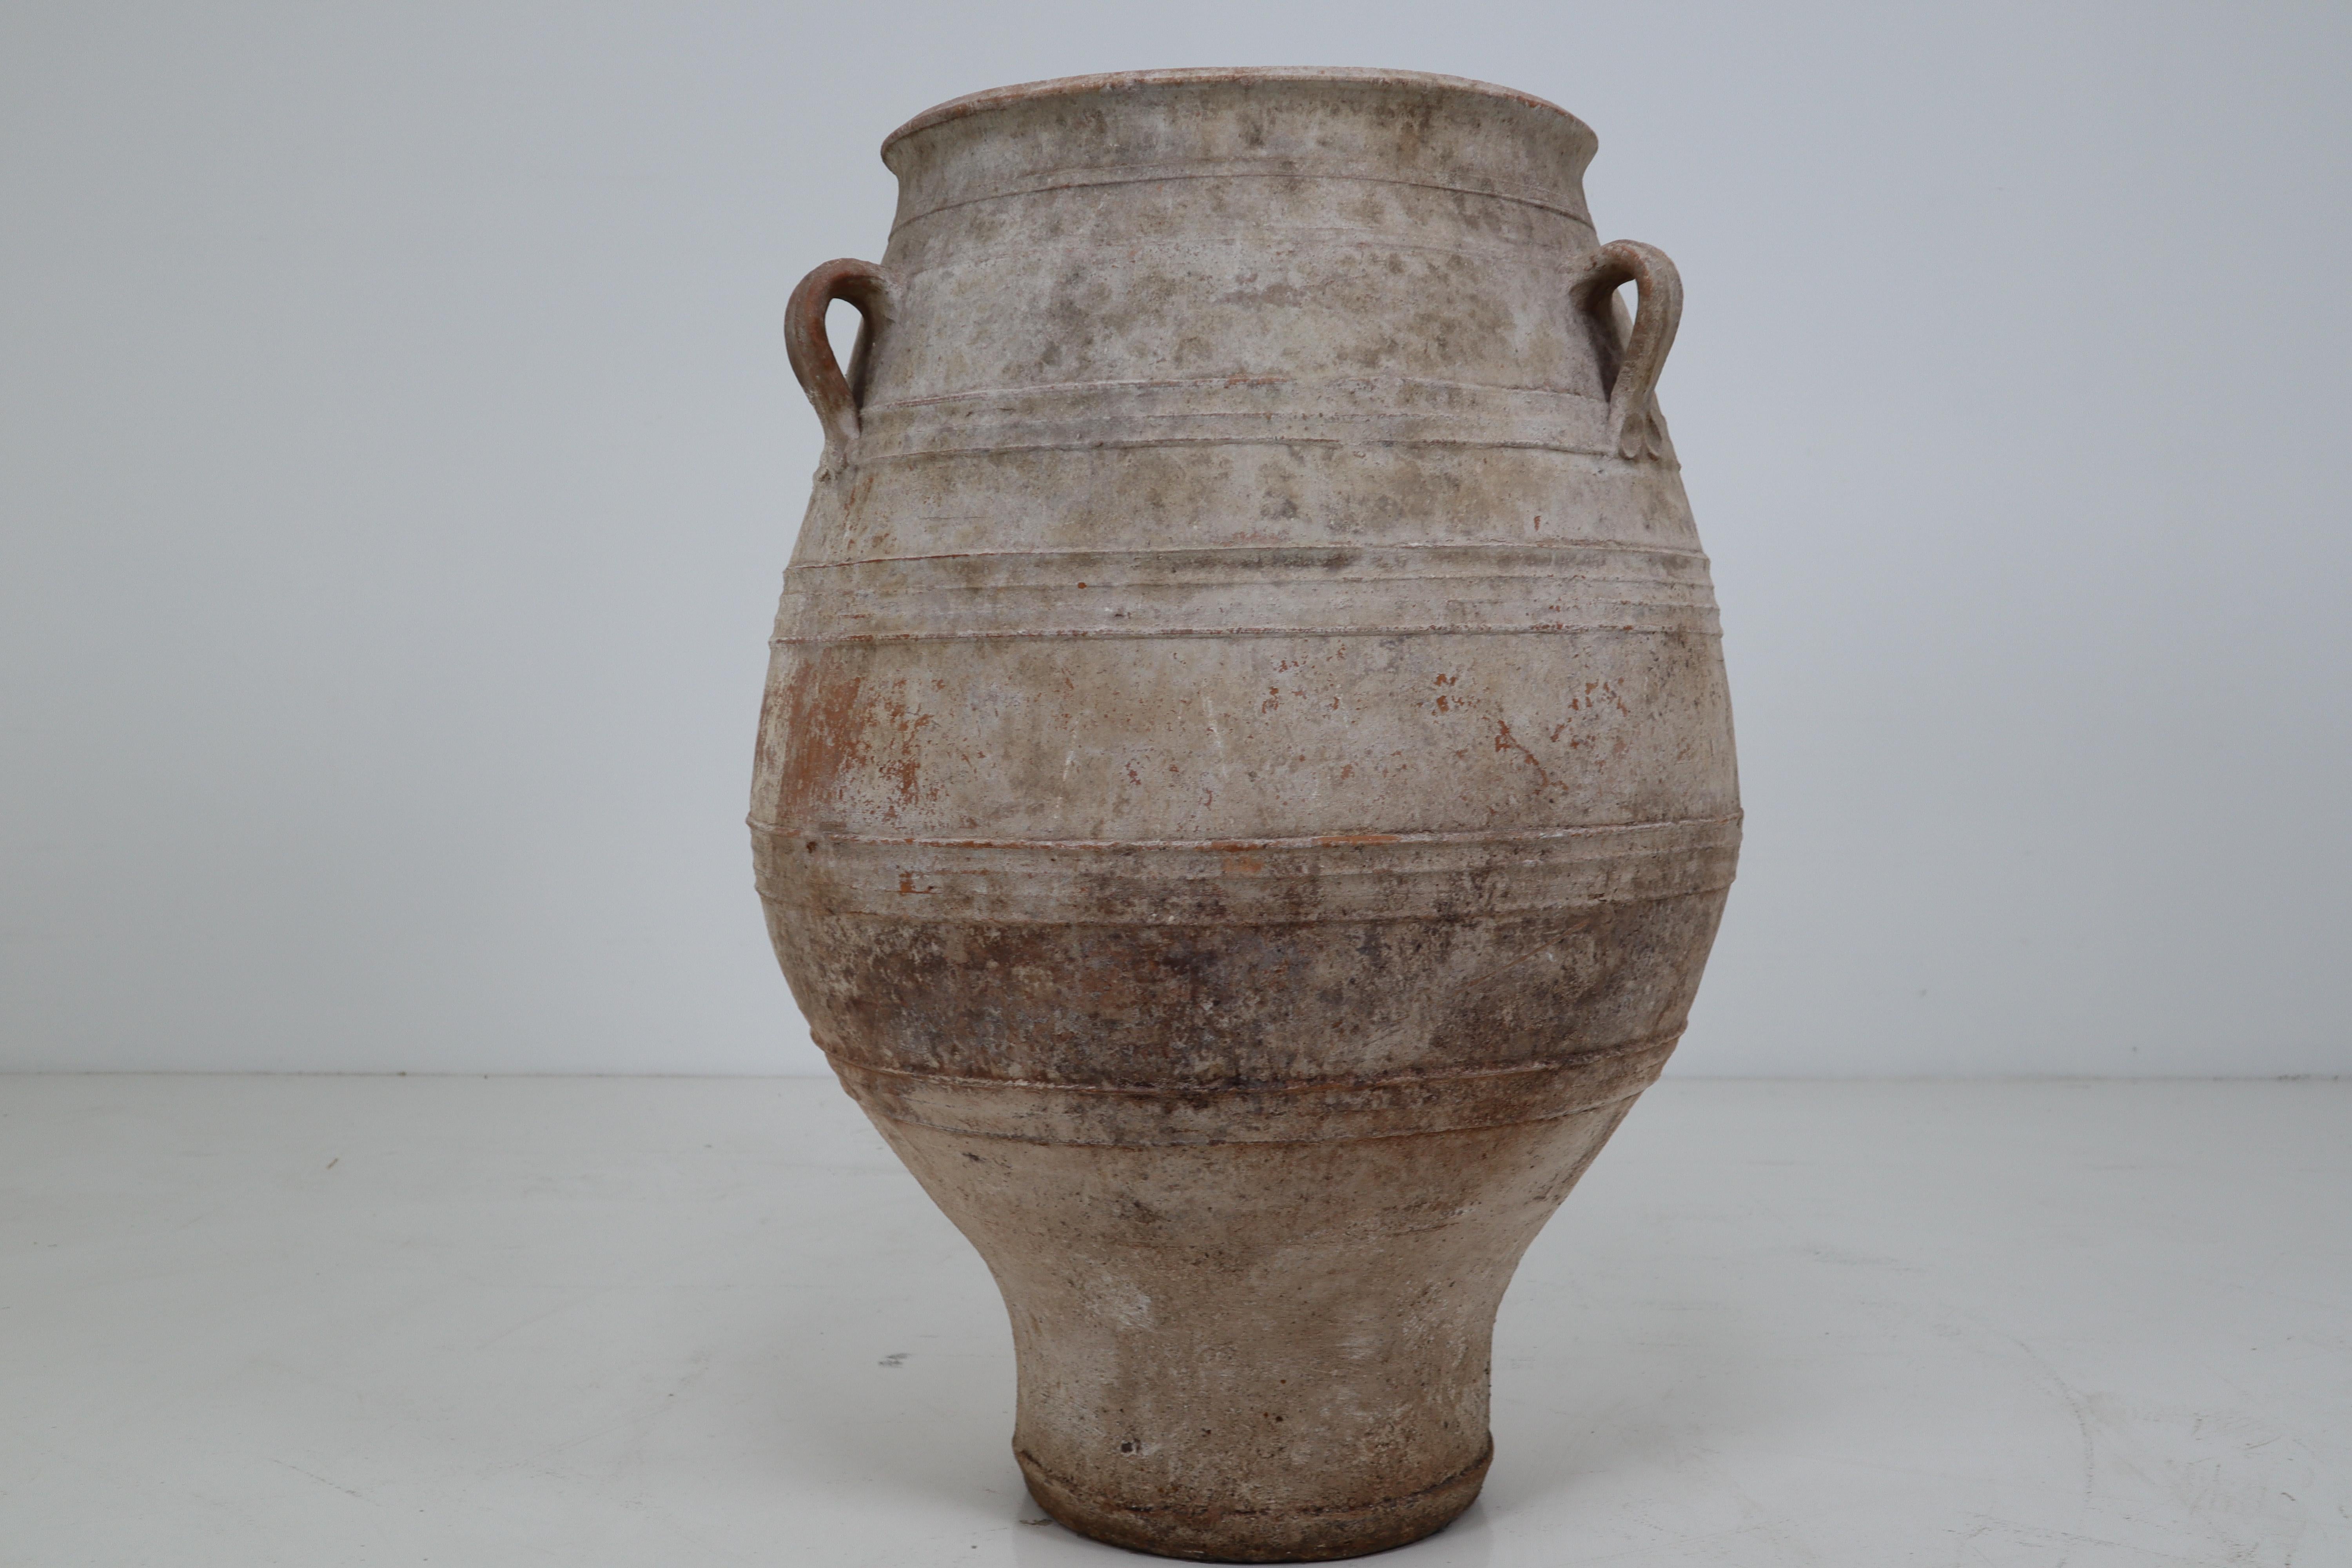 A large vintage three-handled painted terracotta urn from early-20th century Greece, with white finish and rounded belly. Picture this large 1900s urn in its former life, on a shaded terrace under an olive tree overlooking the Mediterranean Sea in